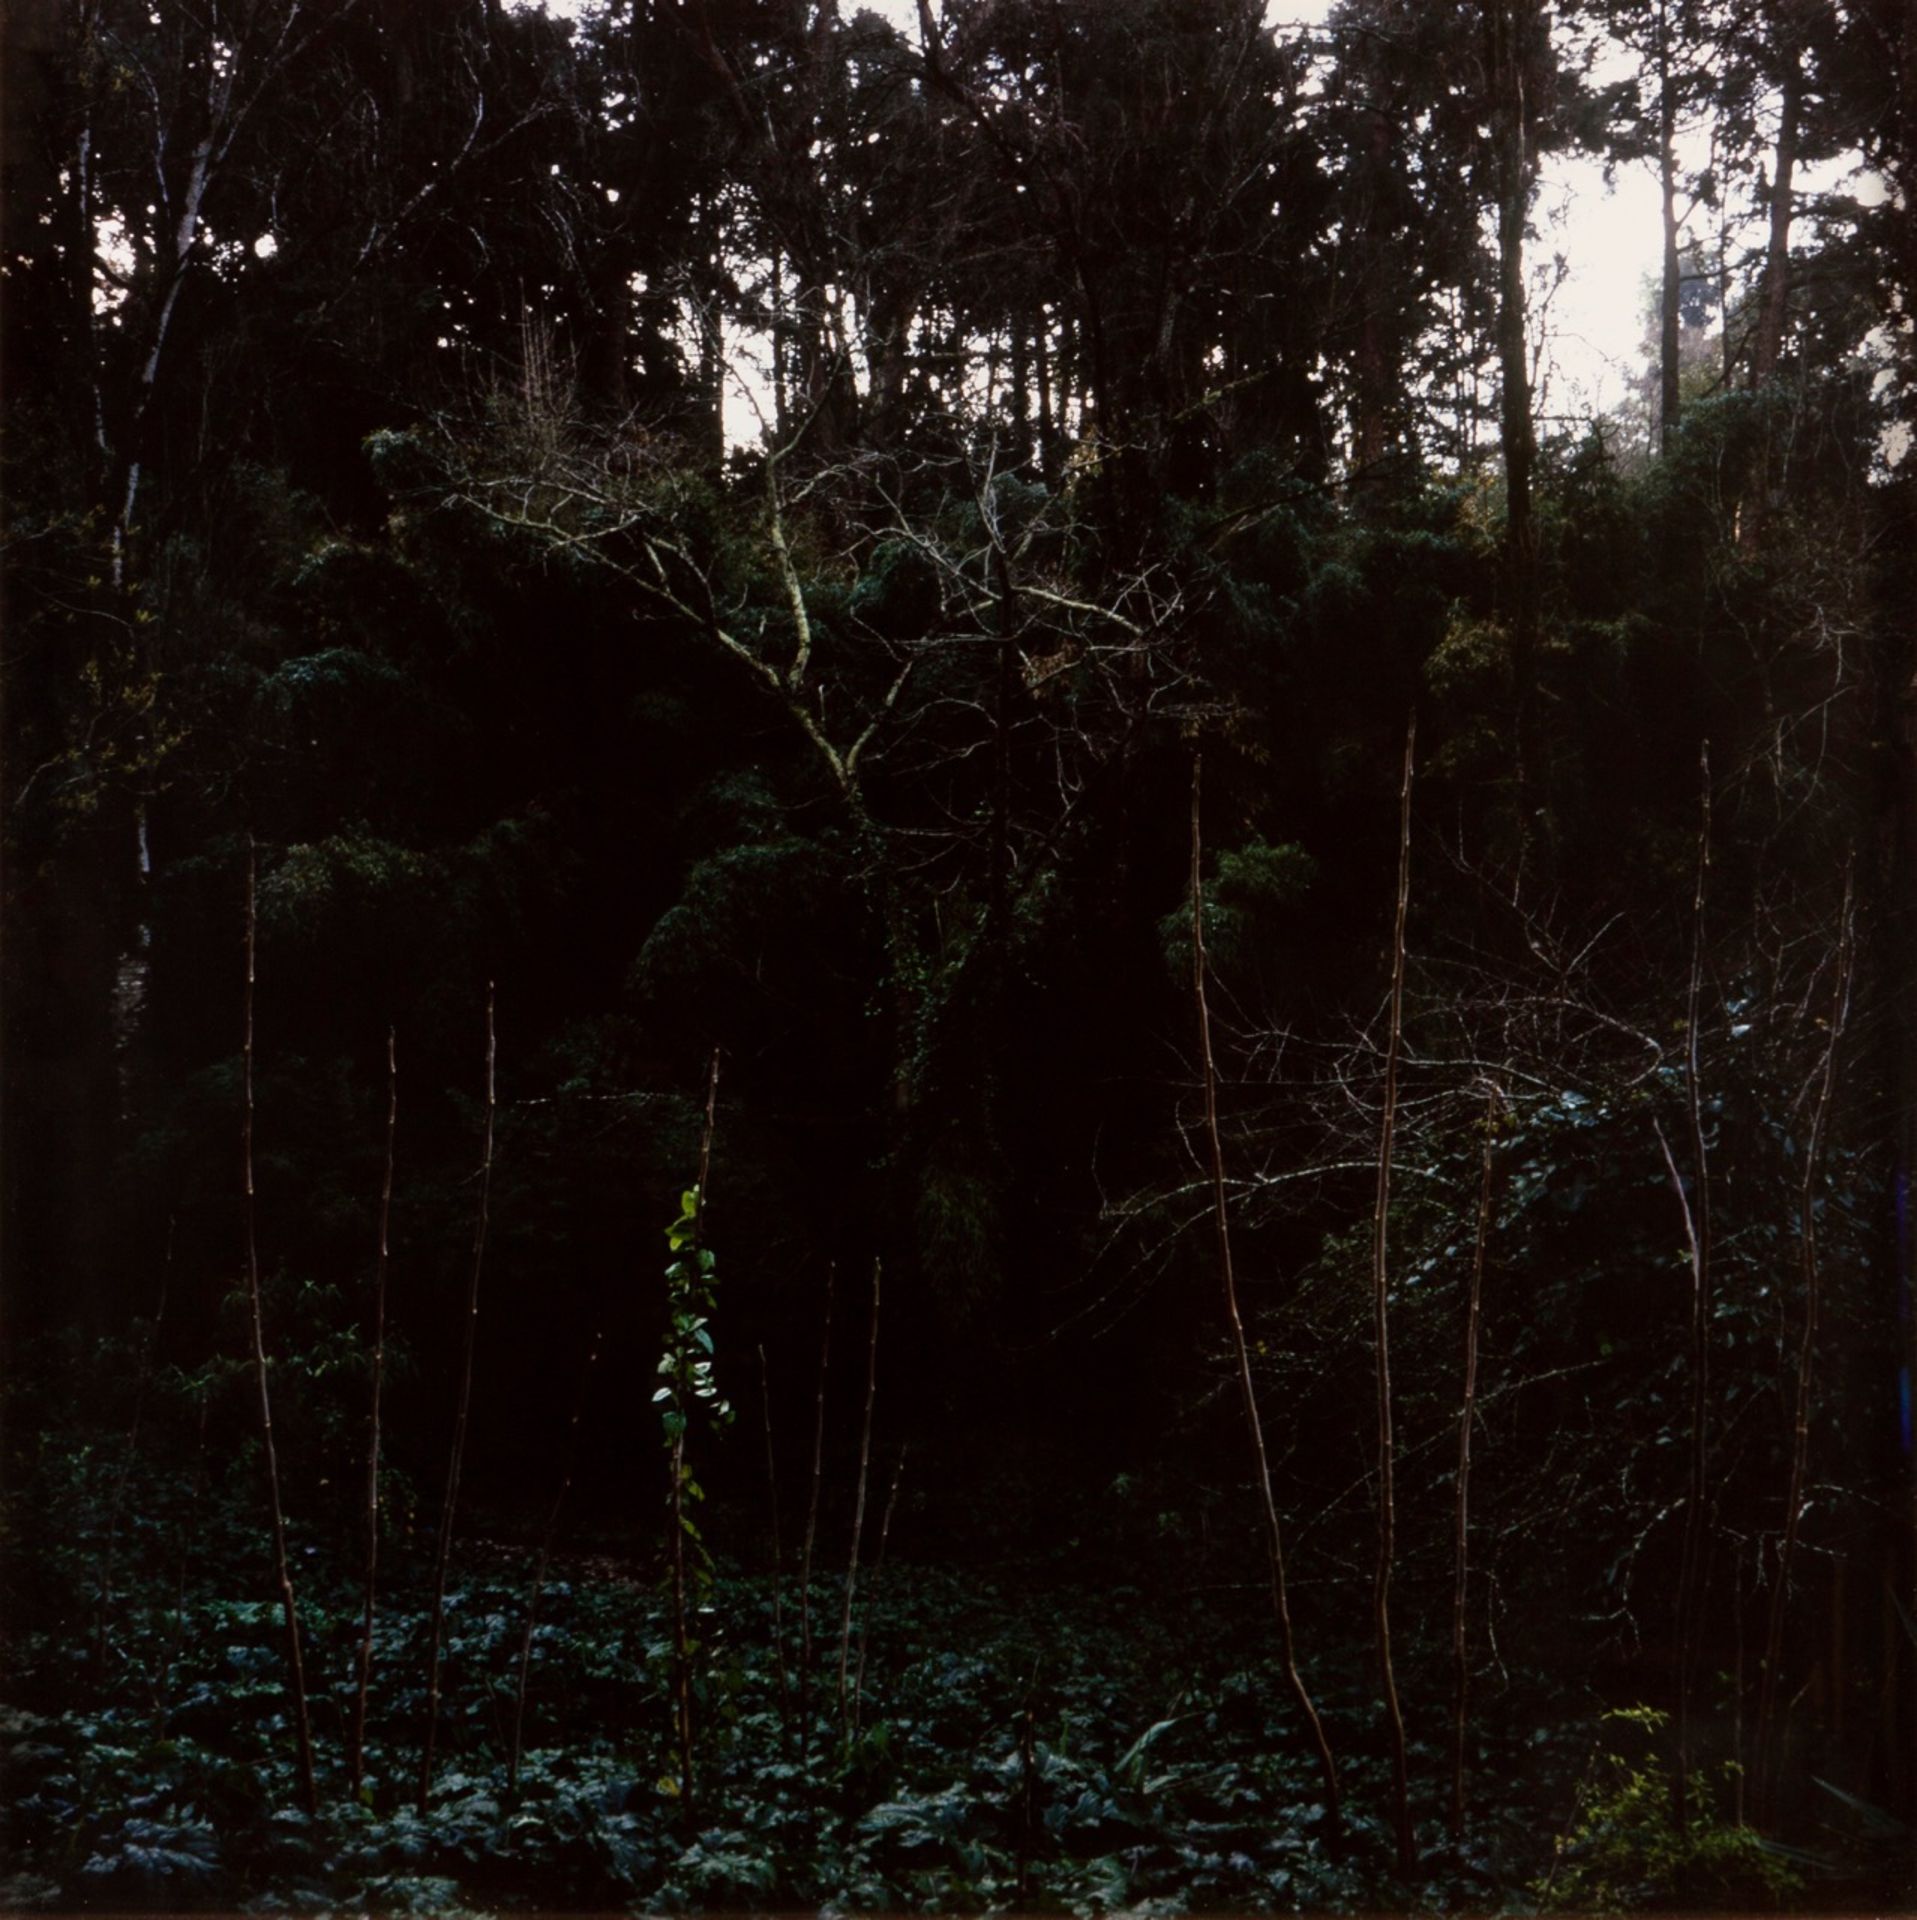 André Cepeda (b. 1973)
Untitled
Photograph

119x119 cm